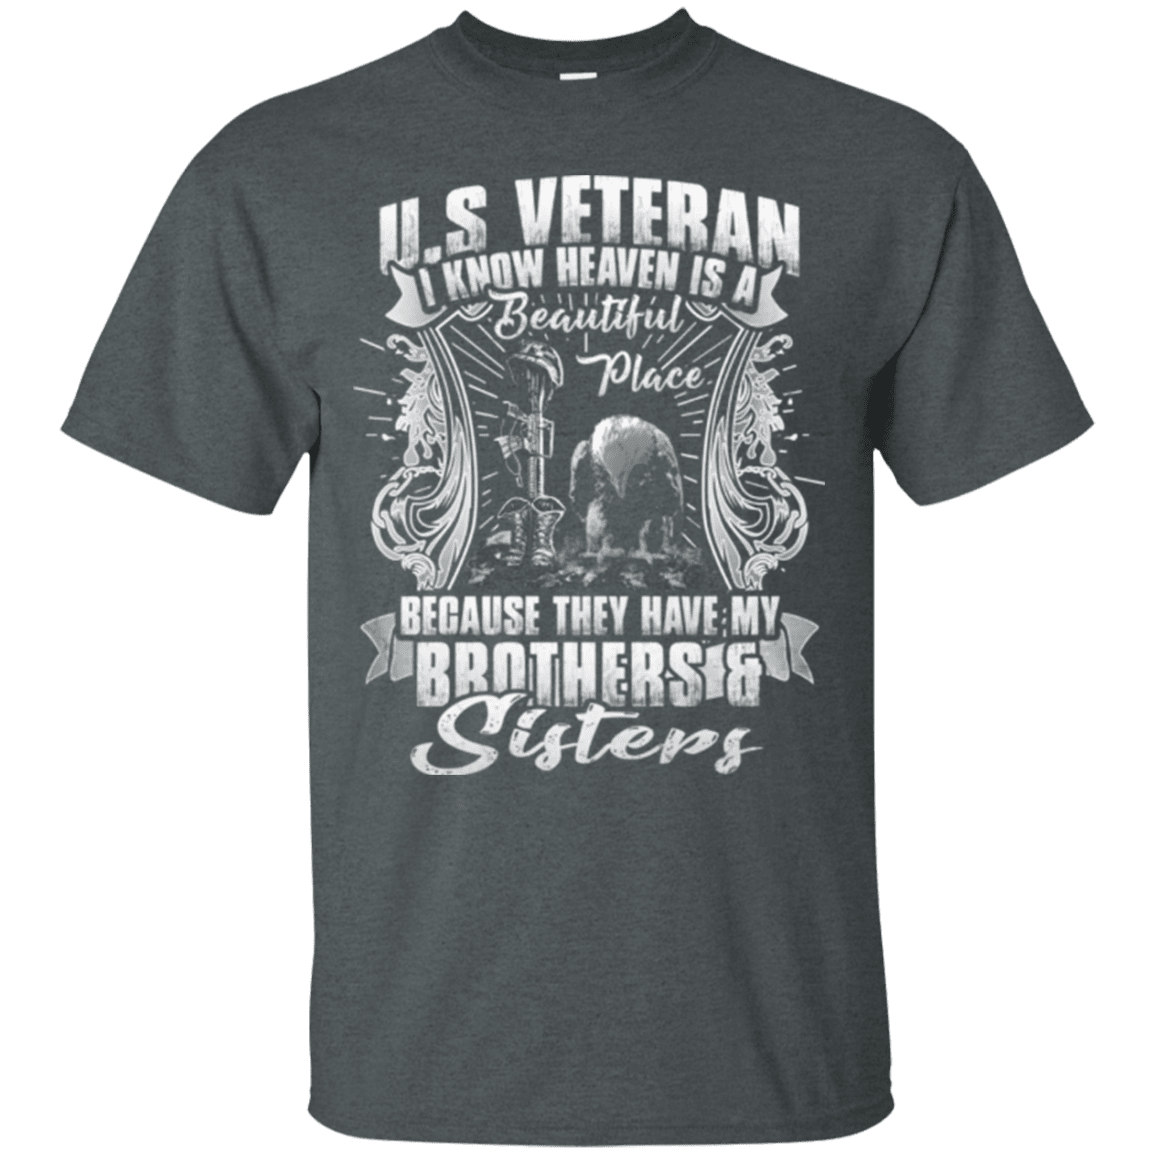 Military T-Shirt "HEAVEN IS THE BEAUTIFUL PLACE WITH BROTHERS AND SISTERS VETERAN"-TShirt-General-Veterans Nation